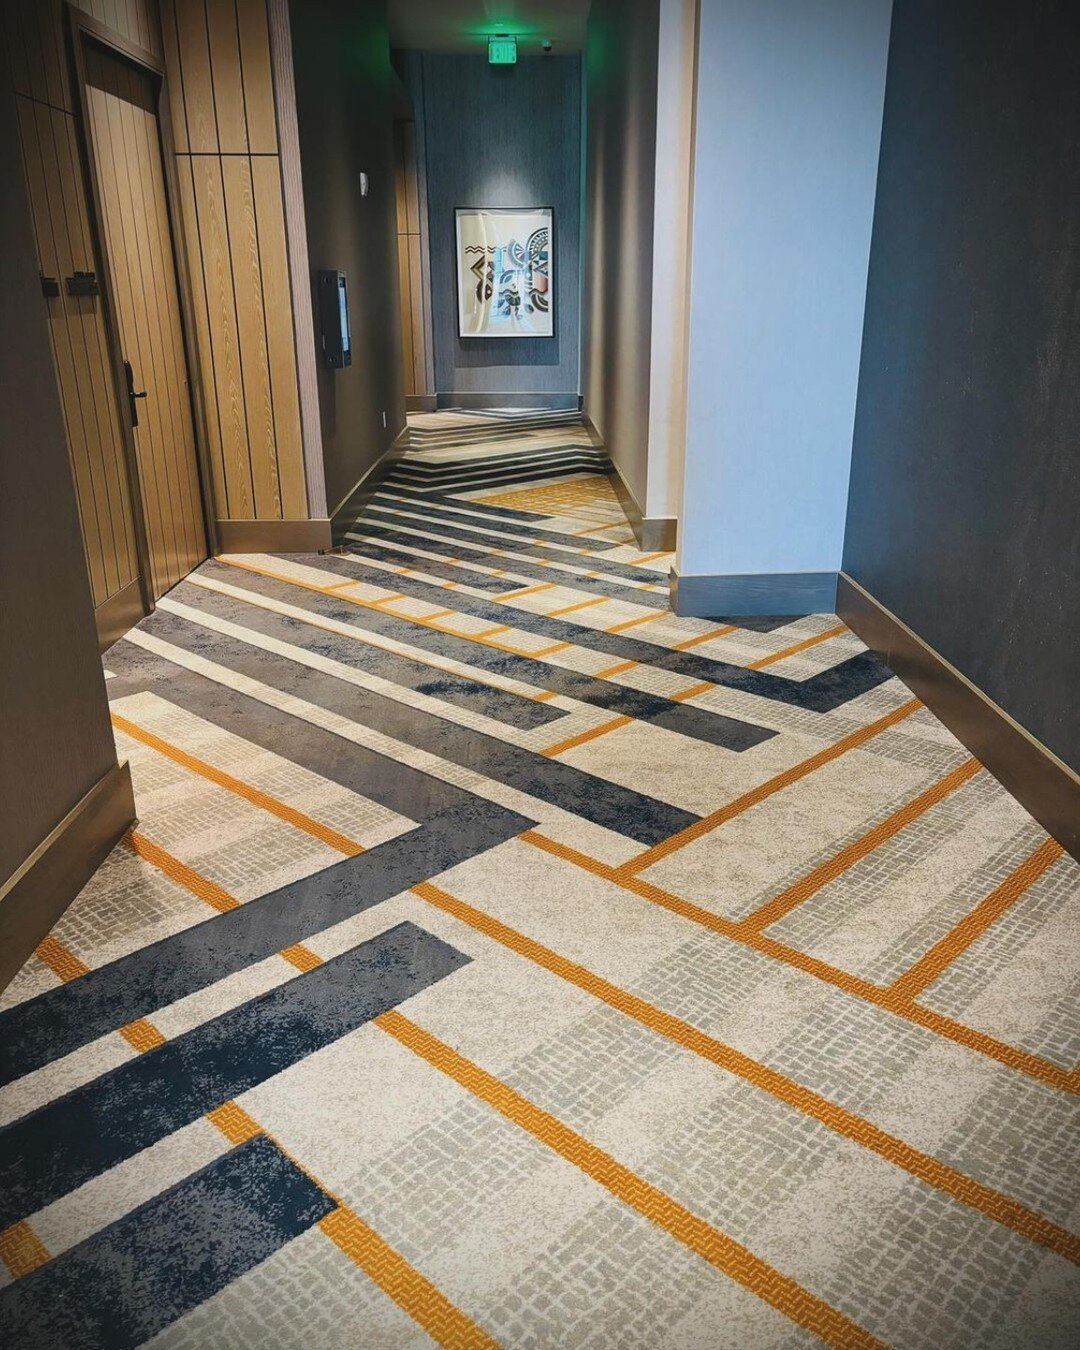 Stunning Brintons install in Tempe, AZ.🤩 The public space carpet at the Omni Tempe property perfectly complements the architecture and natural elements of the space!

@brintonsamericas
.
.
.
.
.
#Brintons #BrintonsCarpets #HospitalityDesign #Commerc